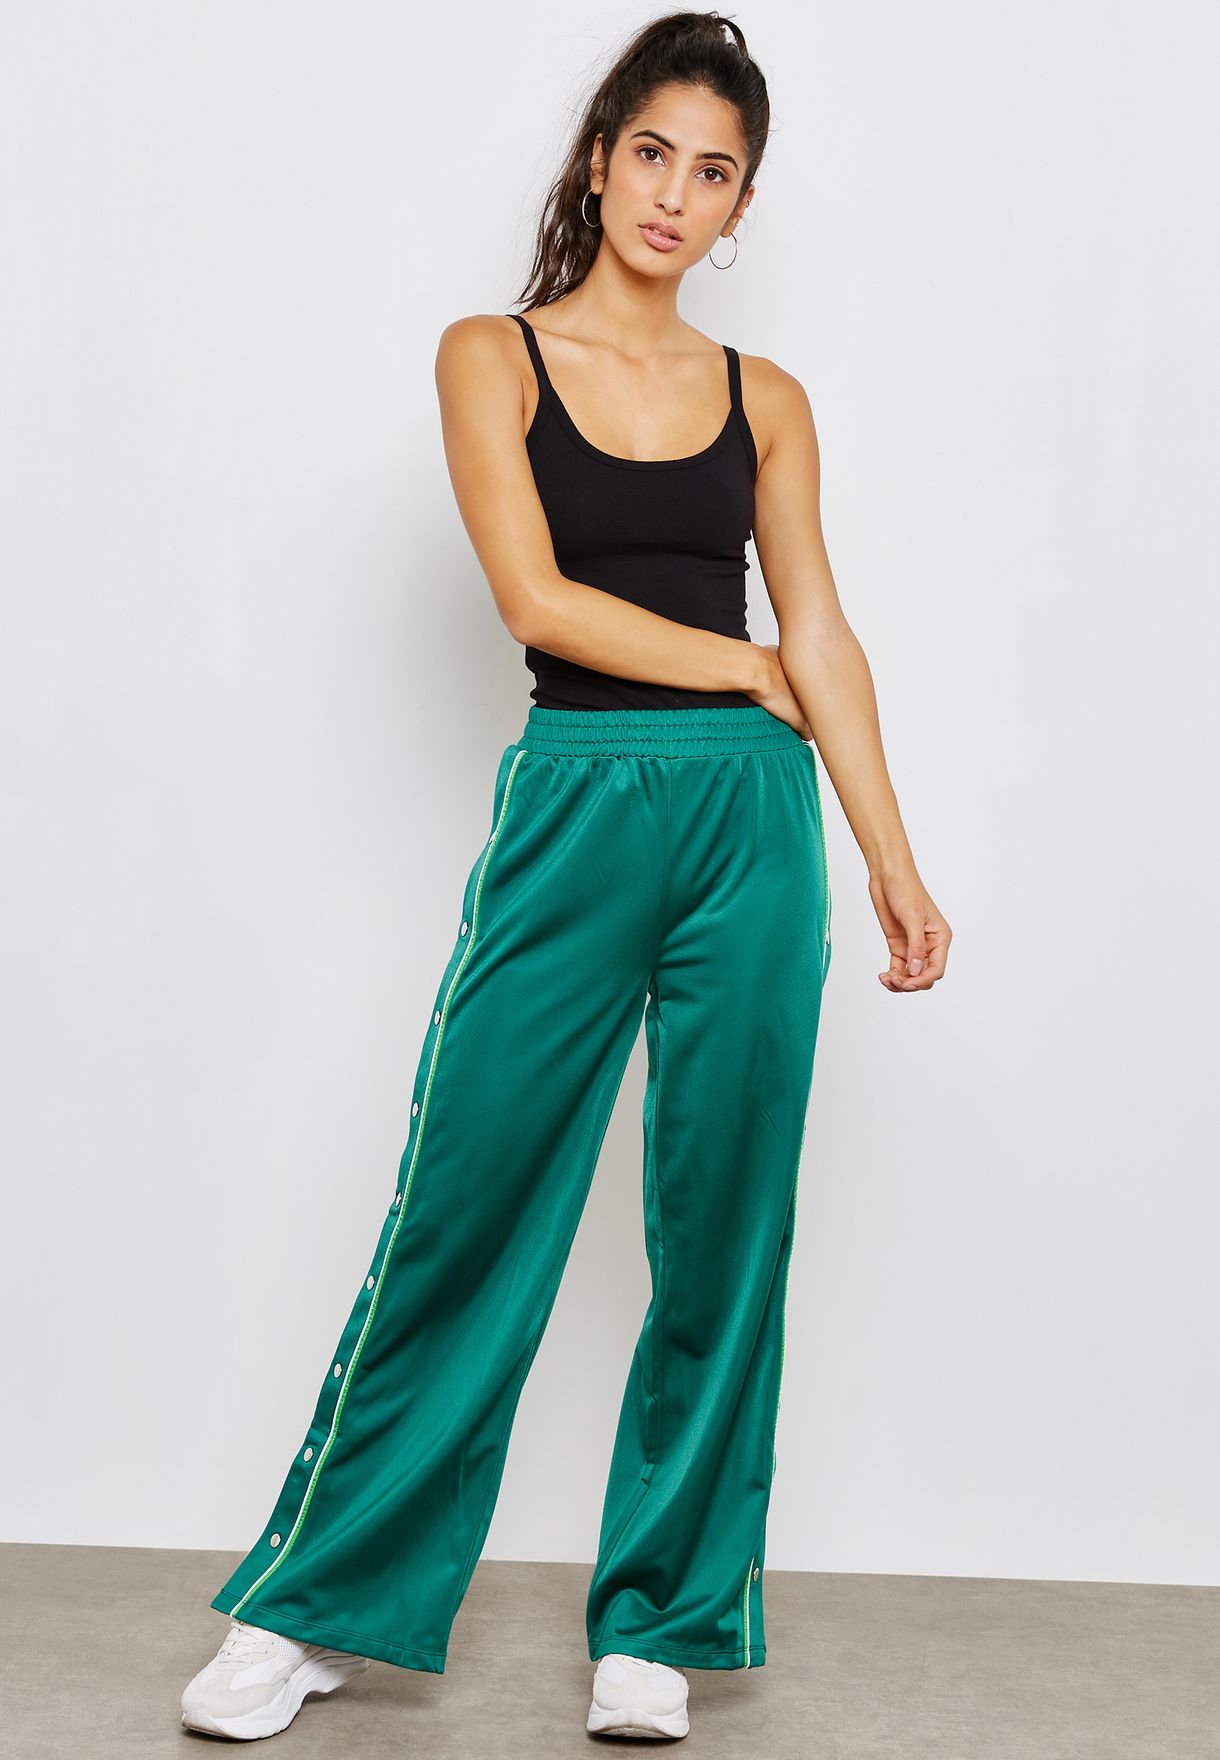 track pants with buttons on side